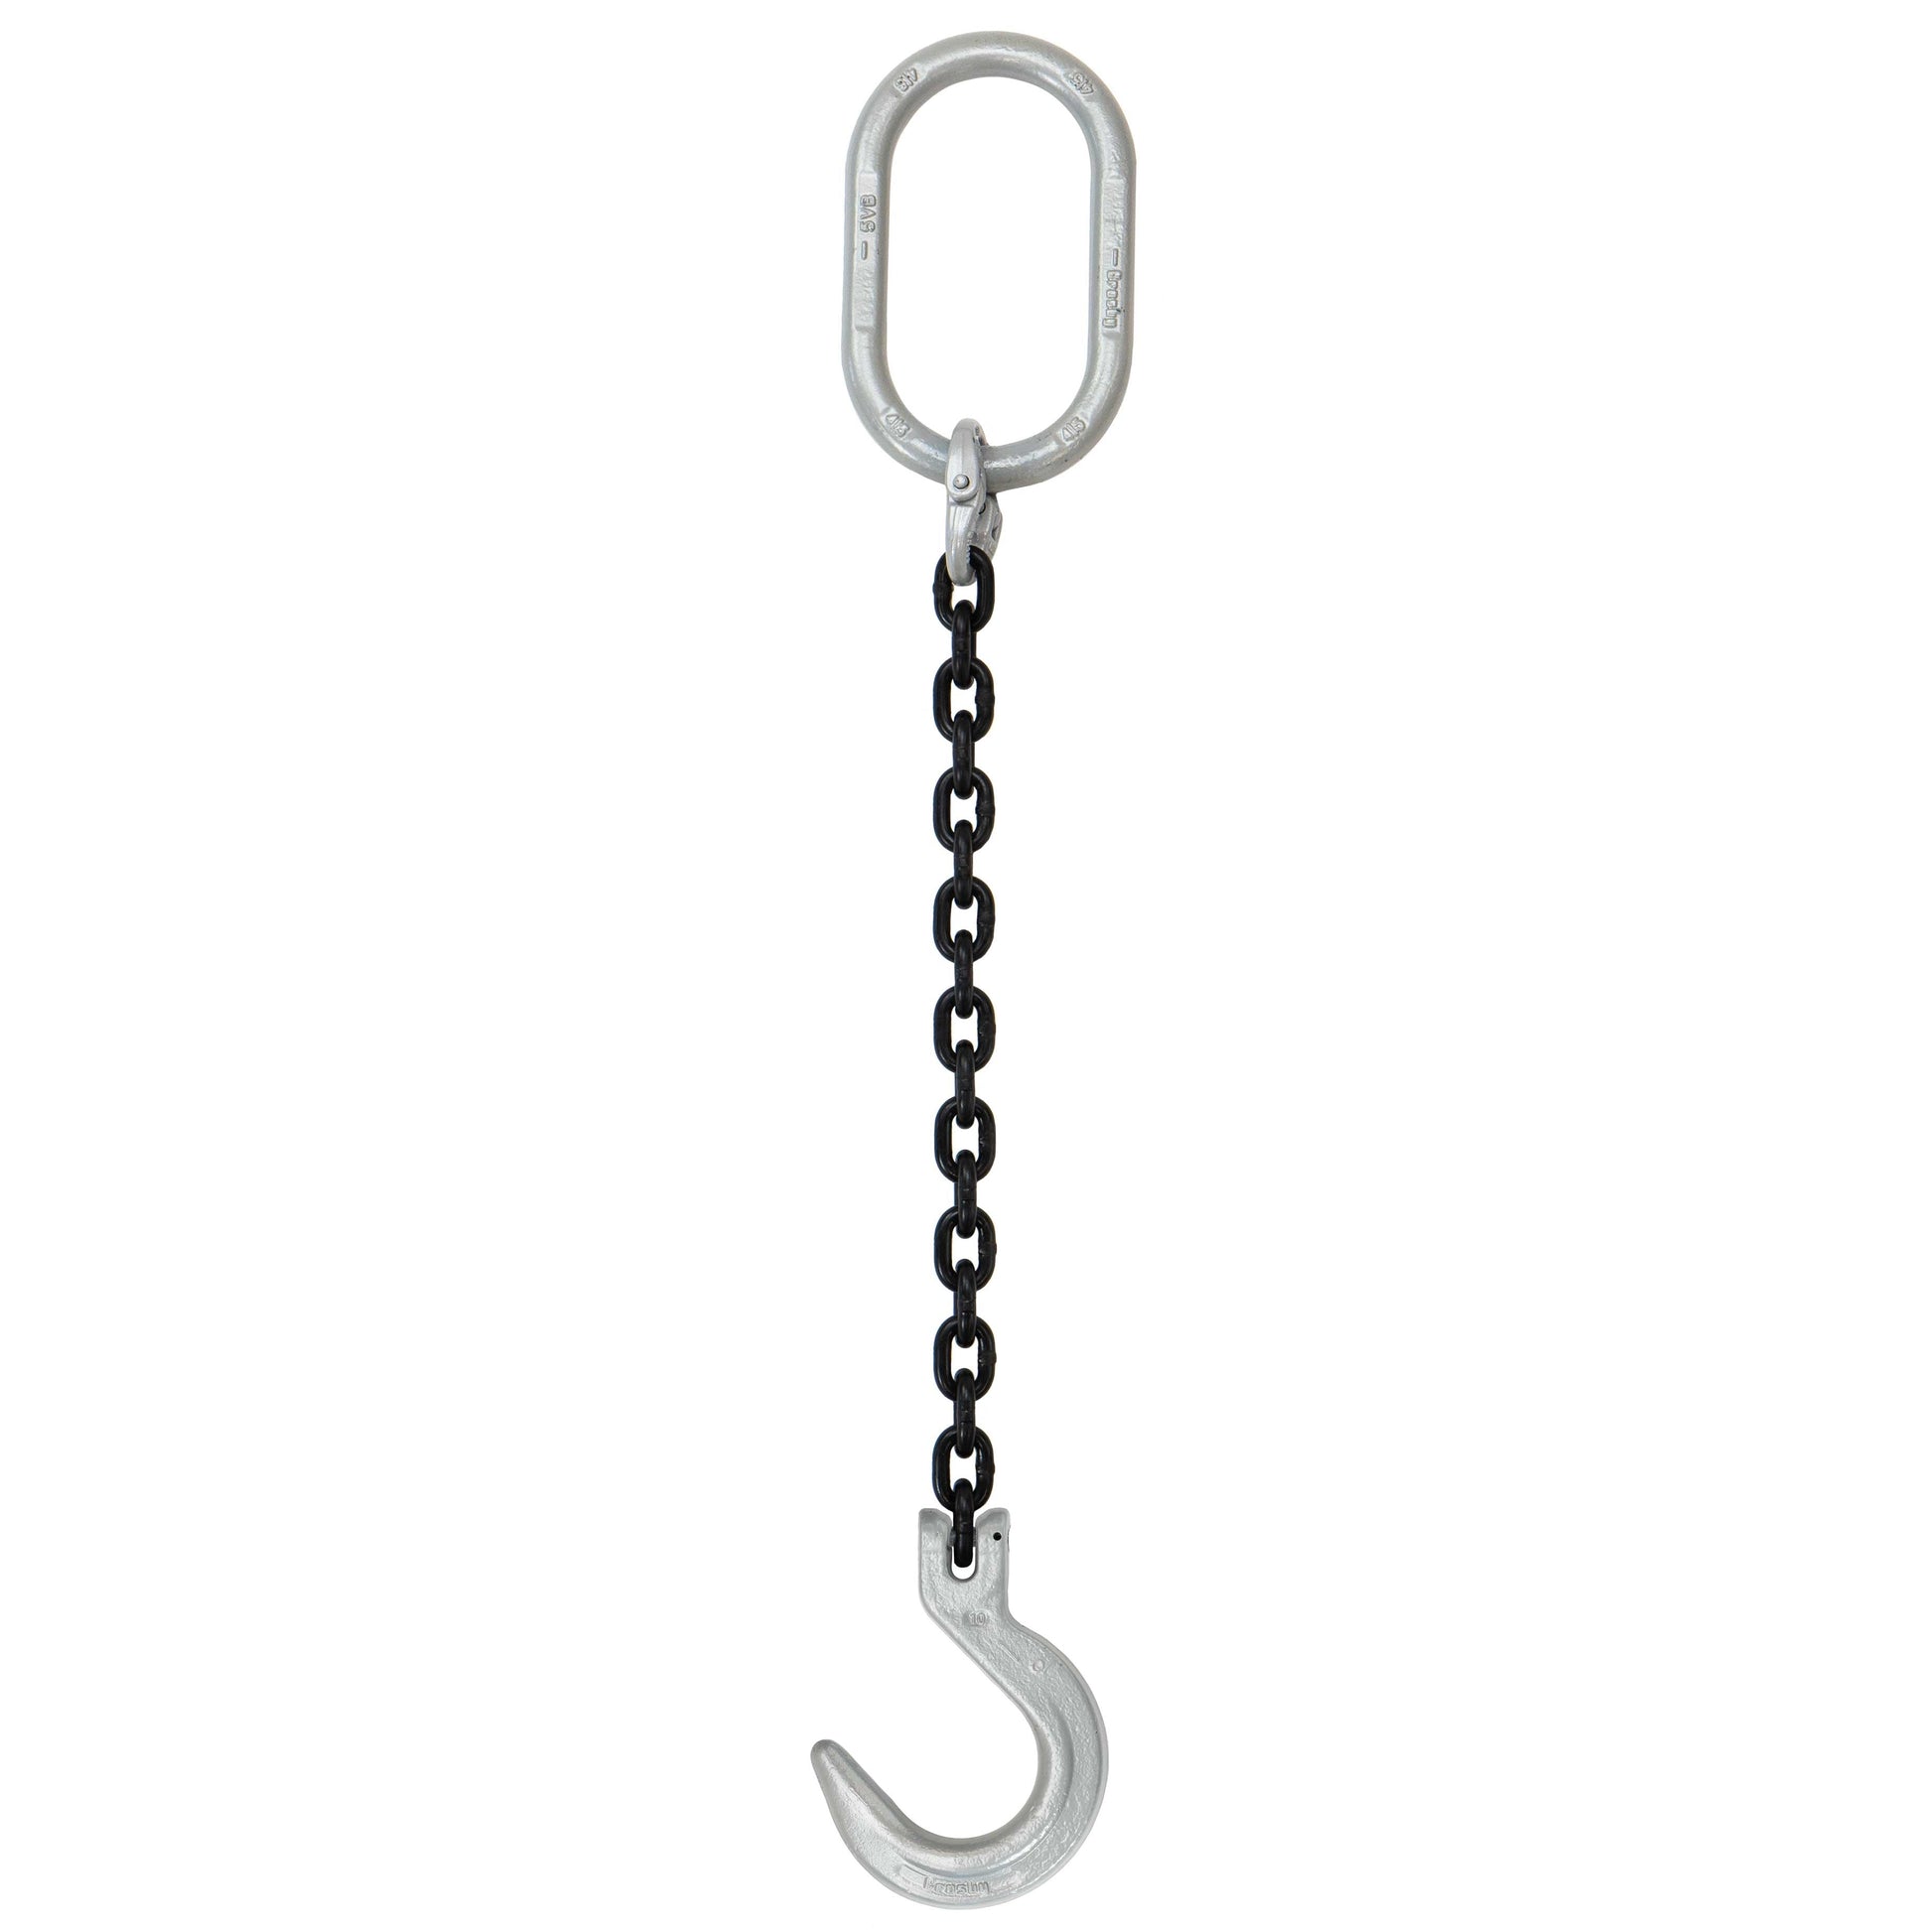 516 inch x 12 foot Domestic Single Leg Chain Sling w Crosby Foundry Hook Grade 100 image 1 of 2